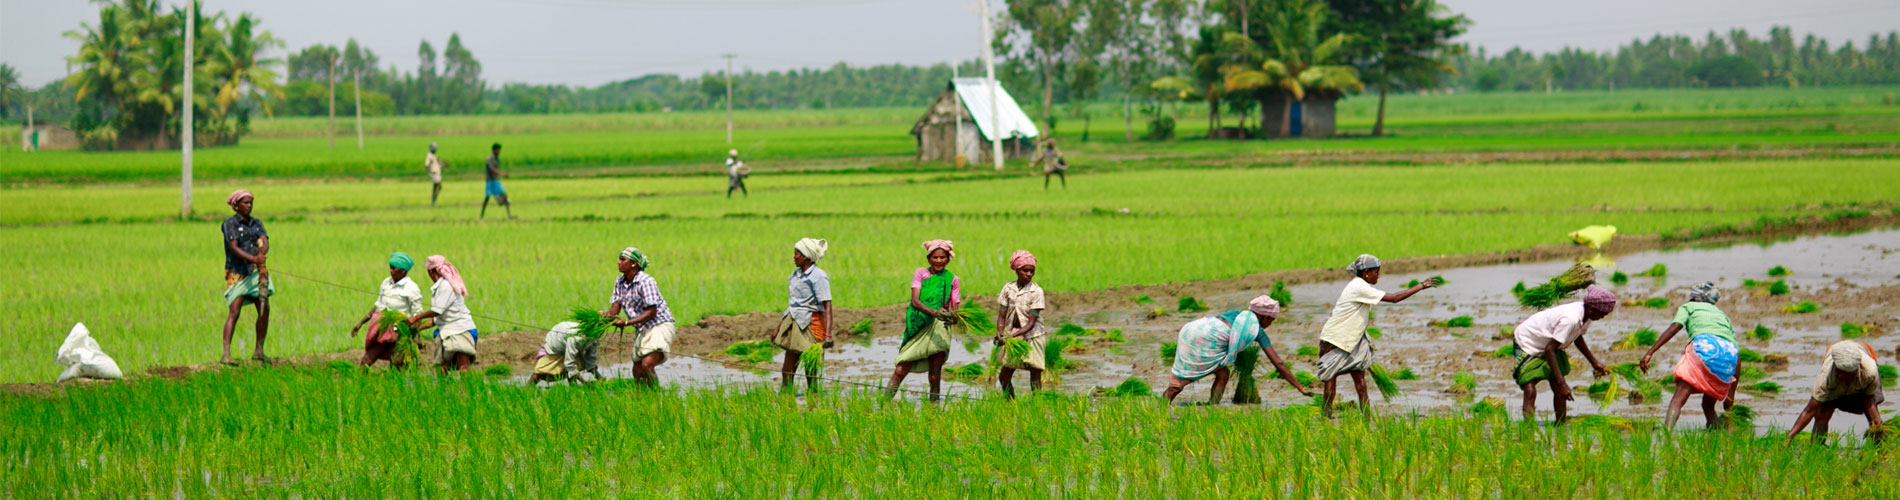 Parboiled rice producer in india